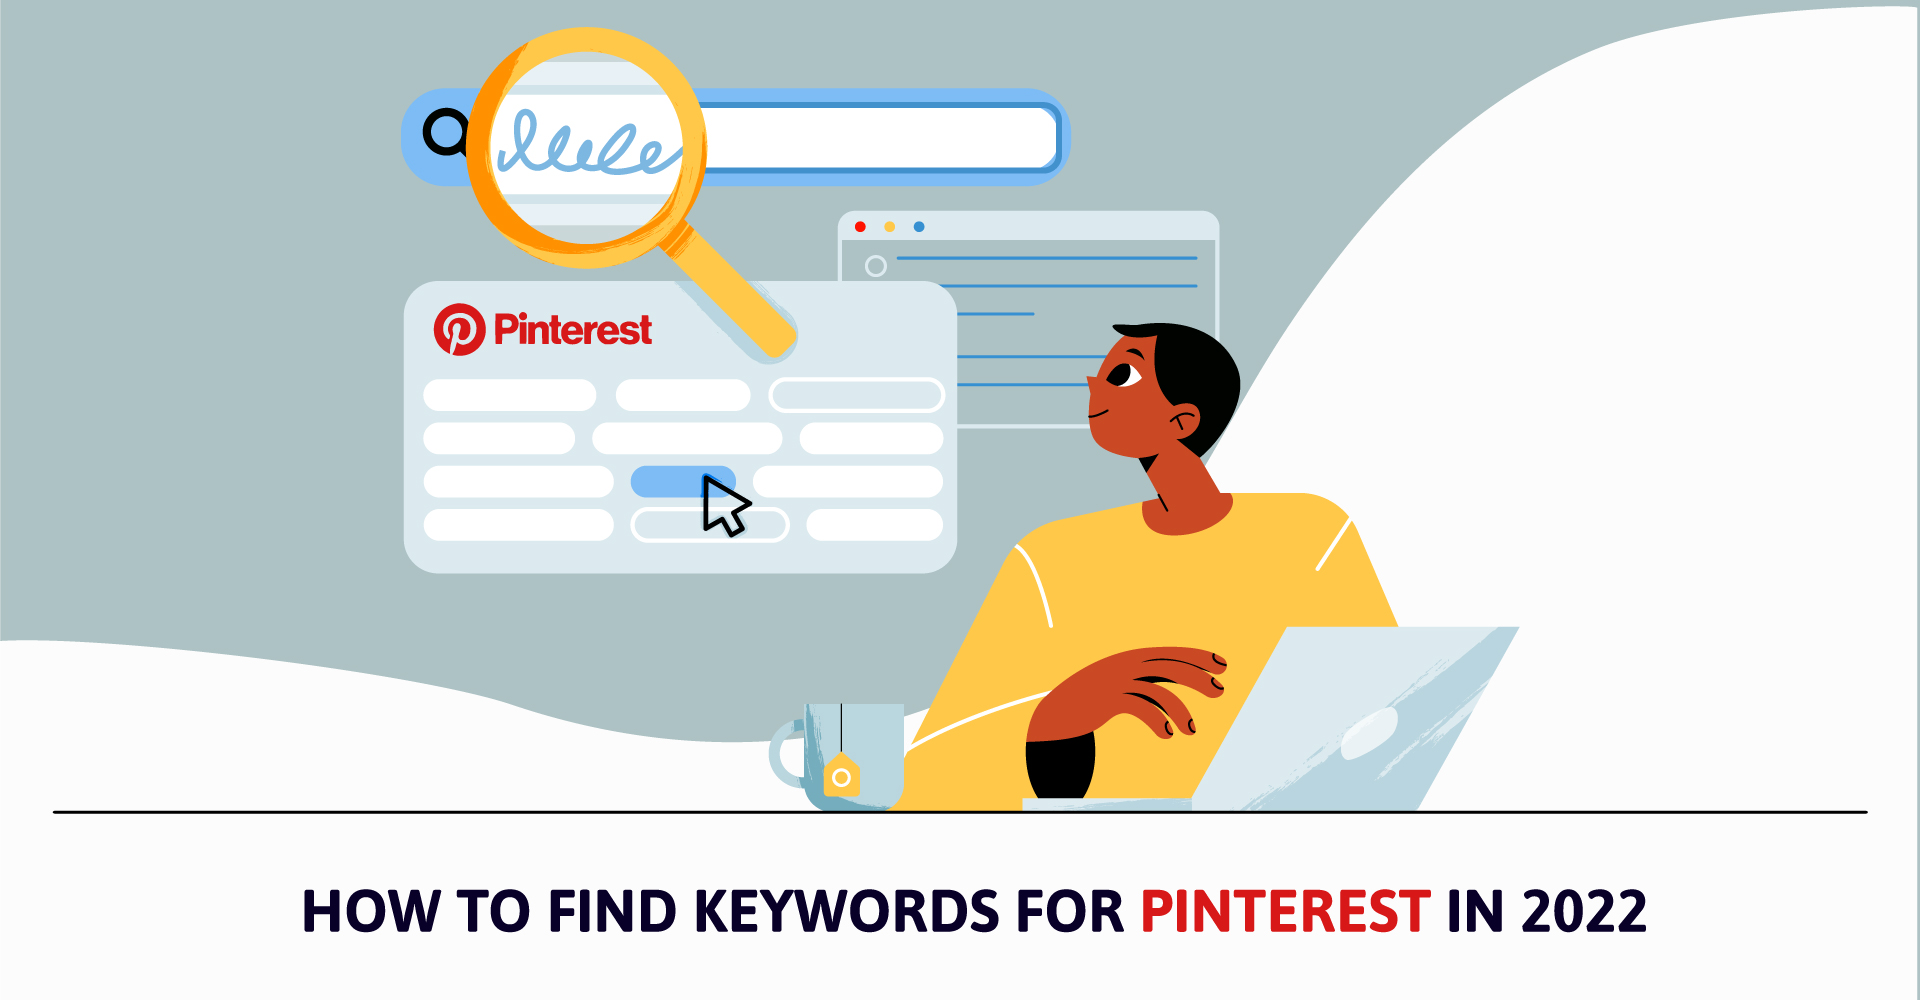 HOW TO FIND KEYWORDS FOR PINTEREST IN 2022